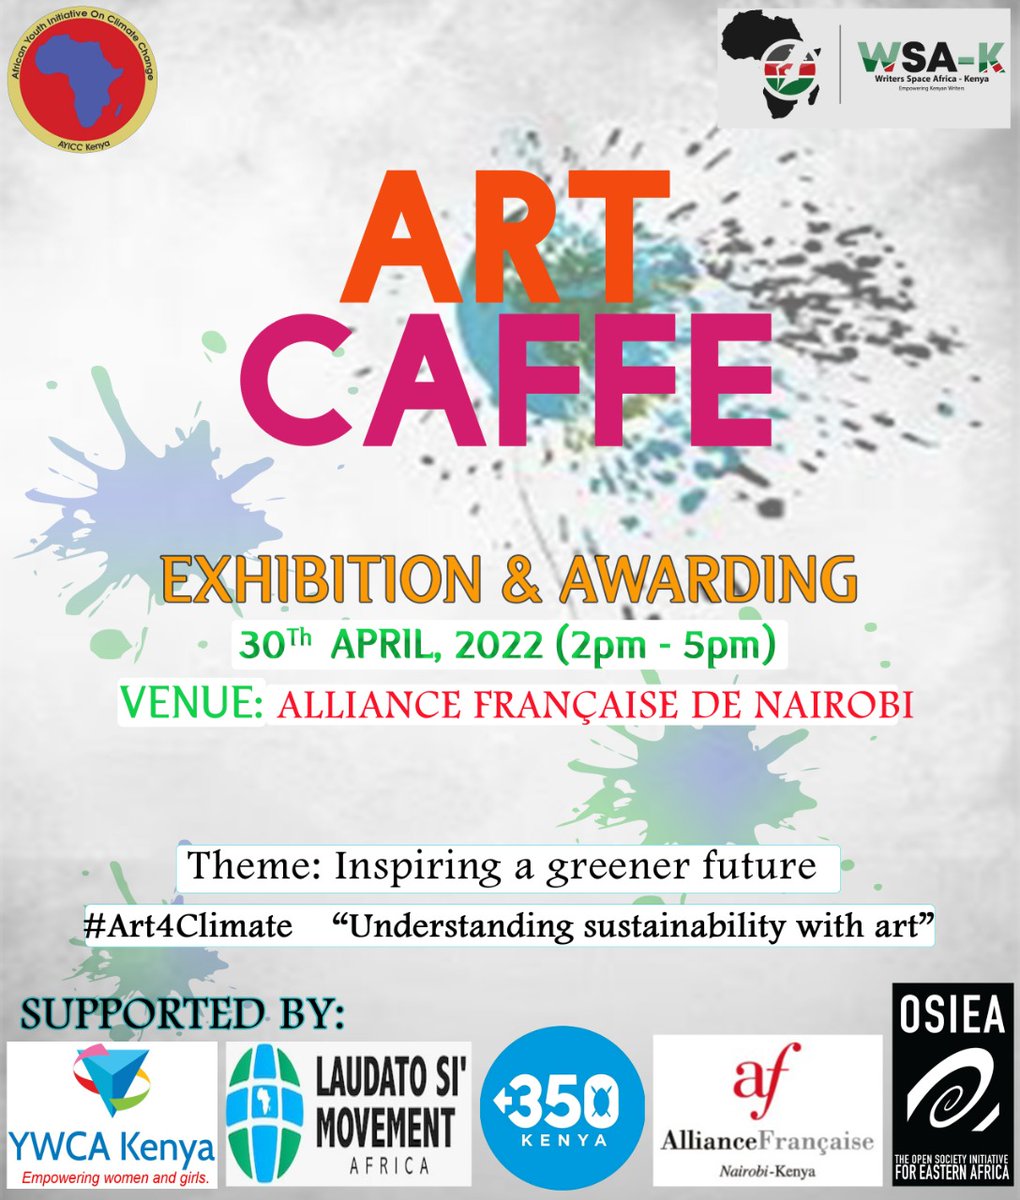 I'll be making my DEBUT spoken word performance this Saturday at this event. Come and witness greatness
#Art4Climate